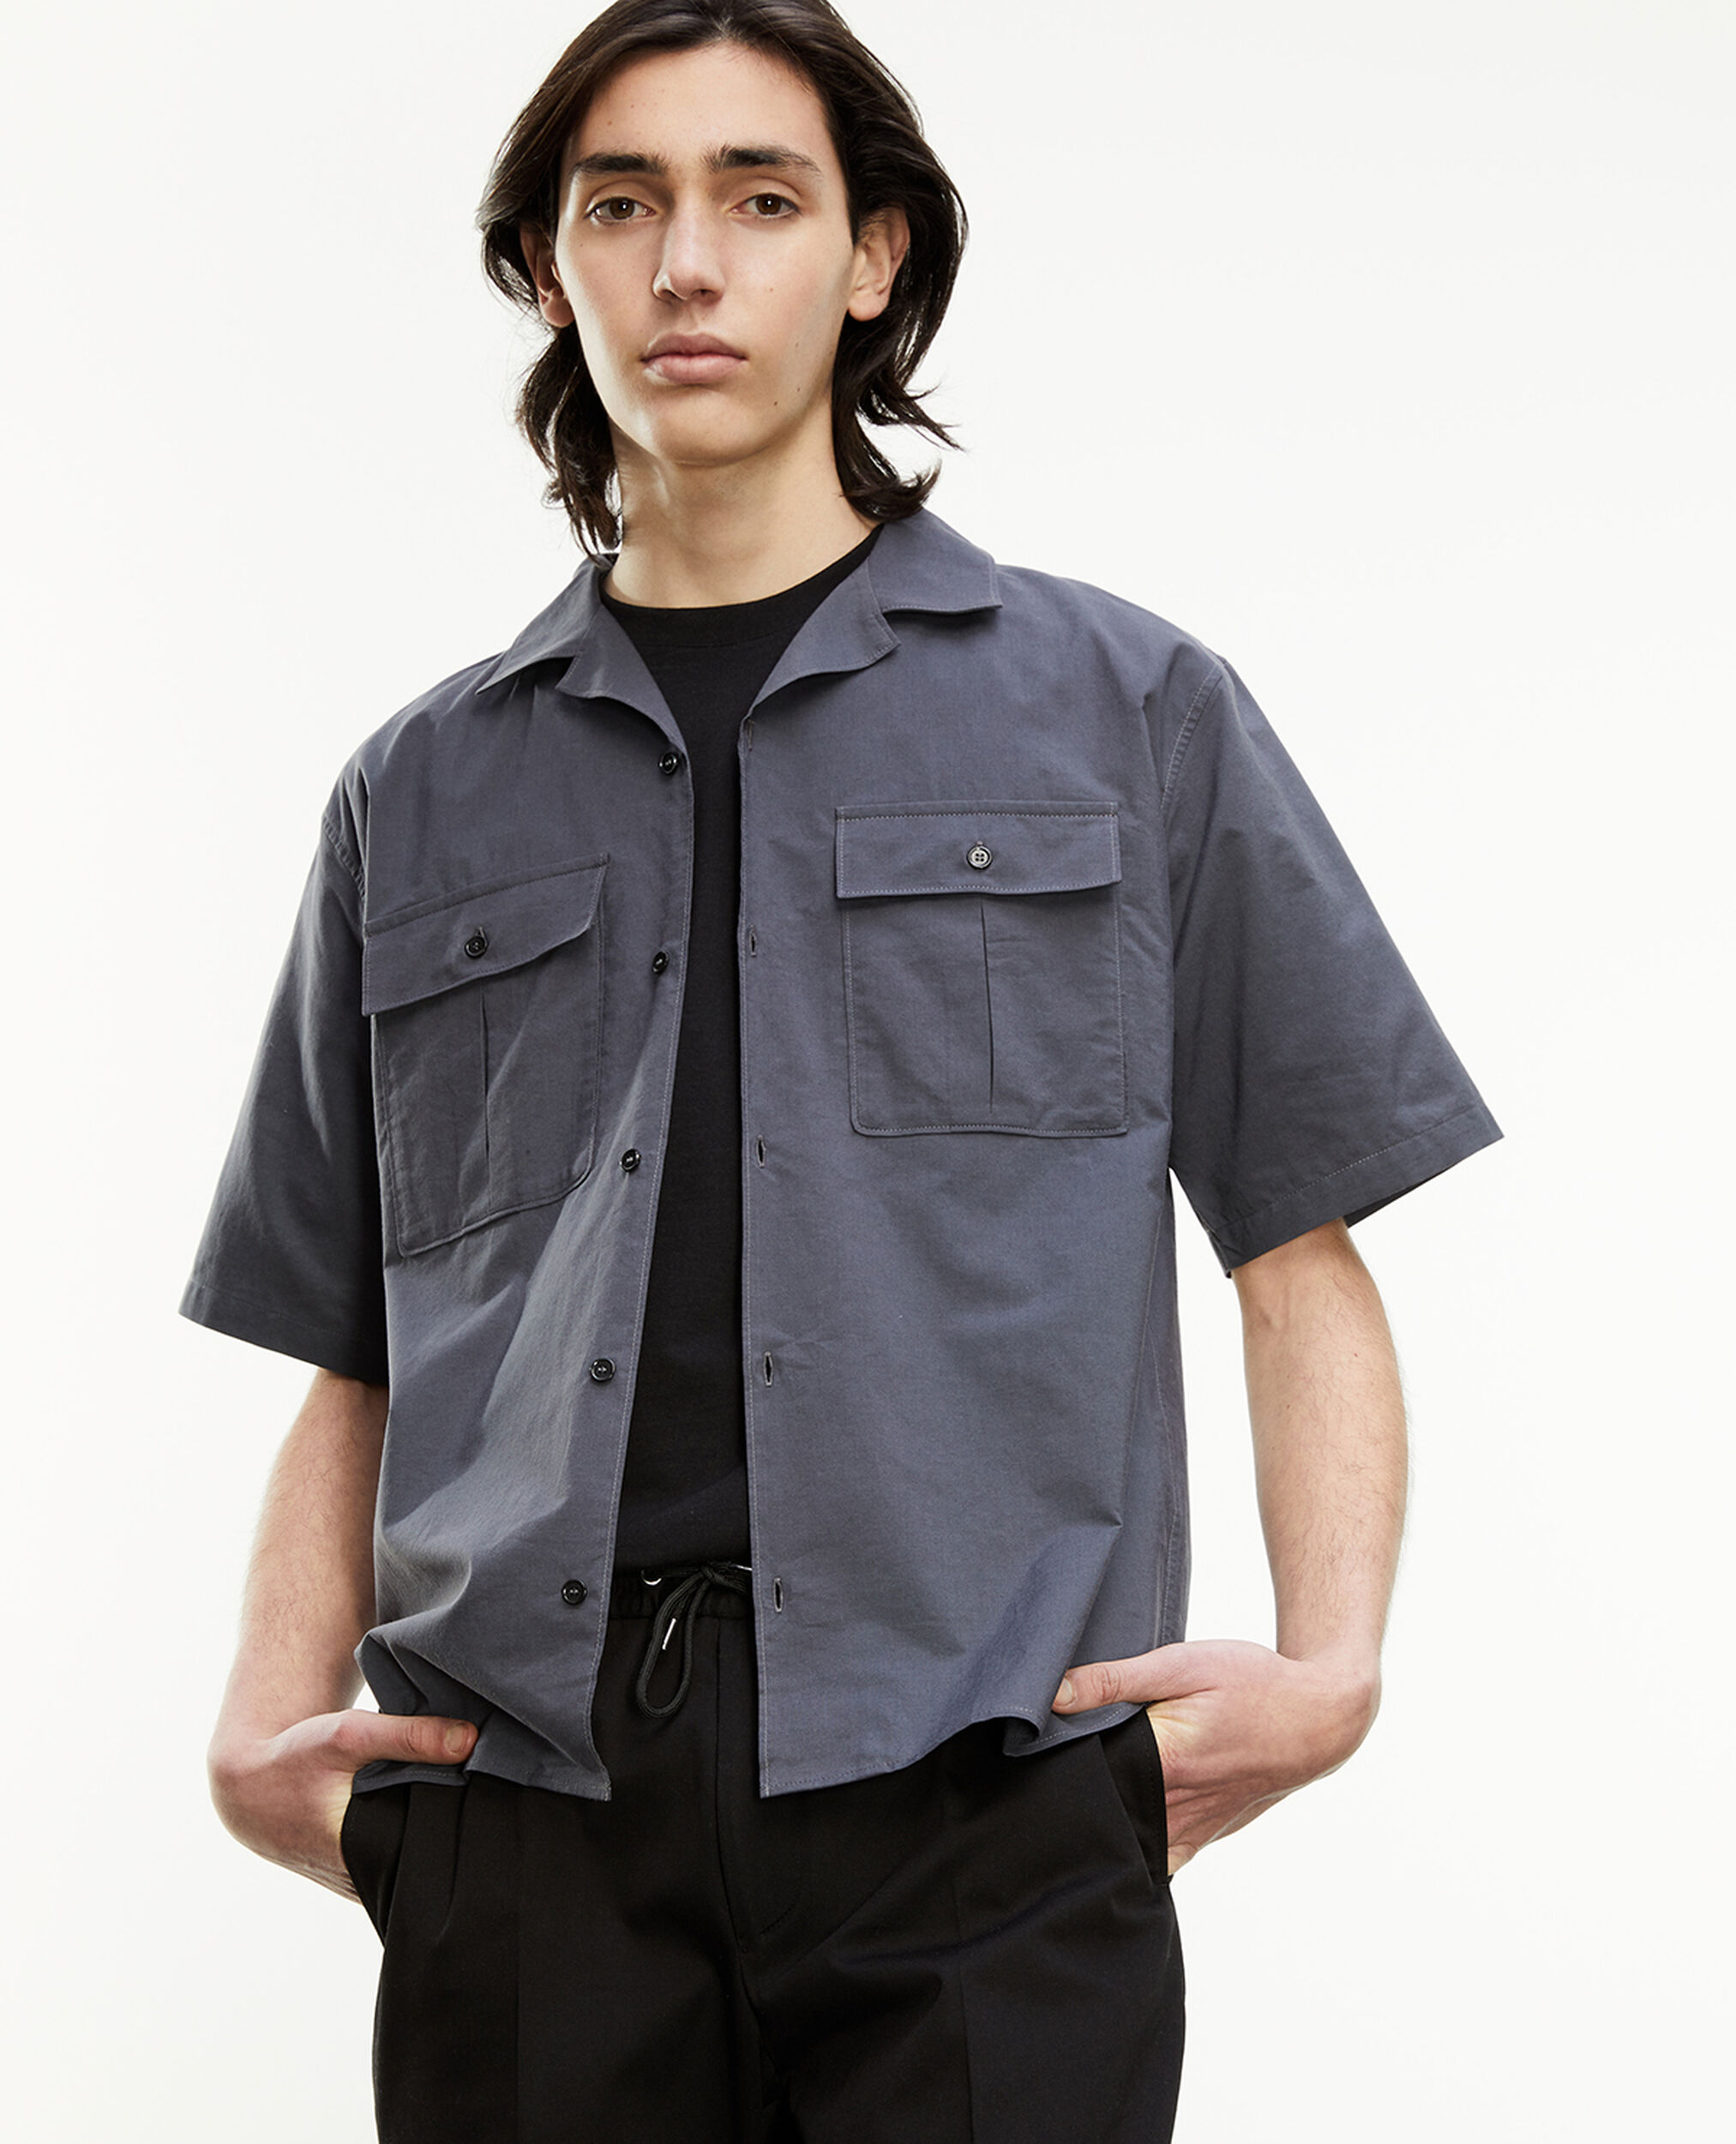 Charcoal gray cotton shirt with pockets, DARK GREY, hi-res image number null